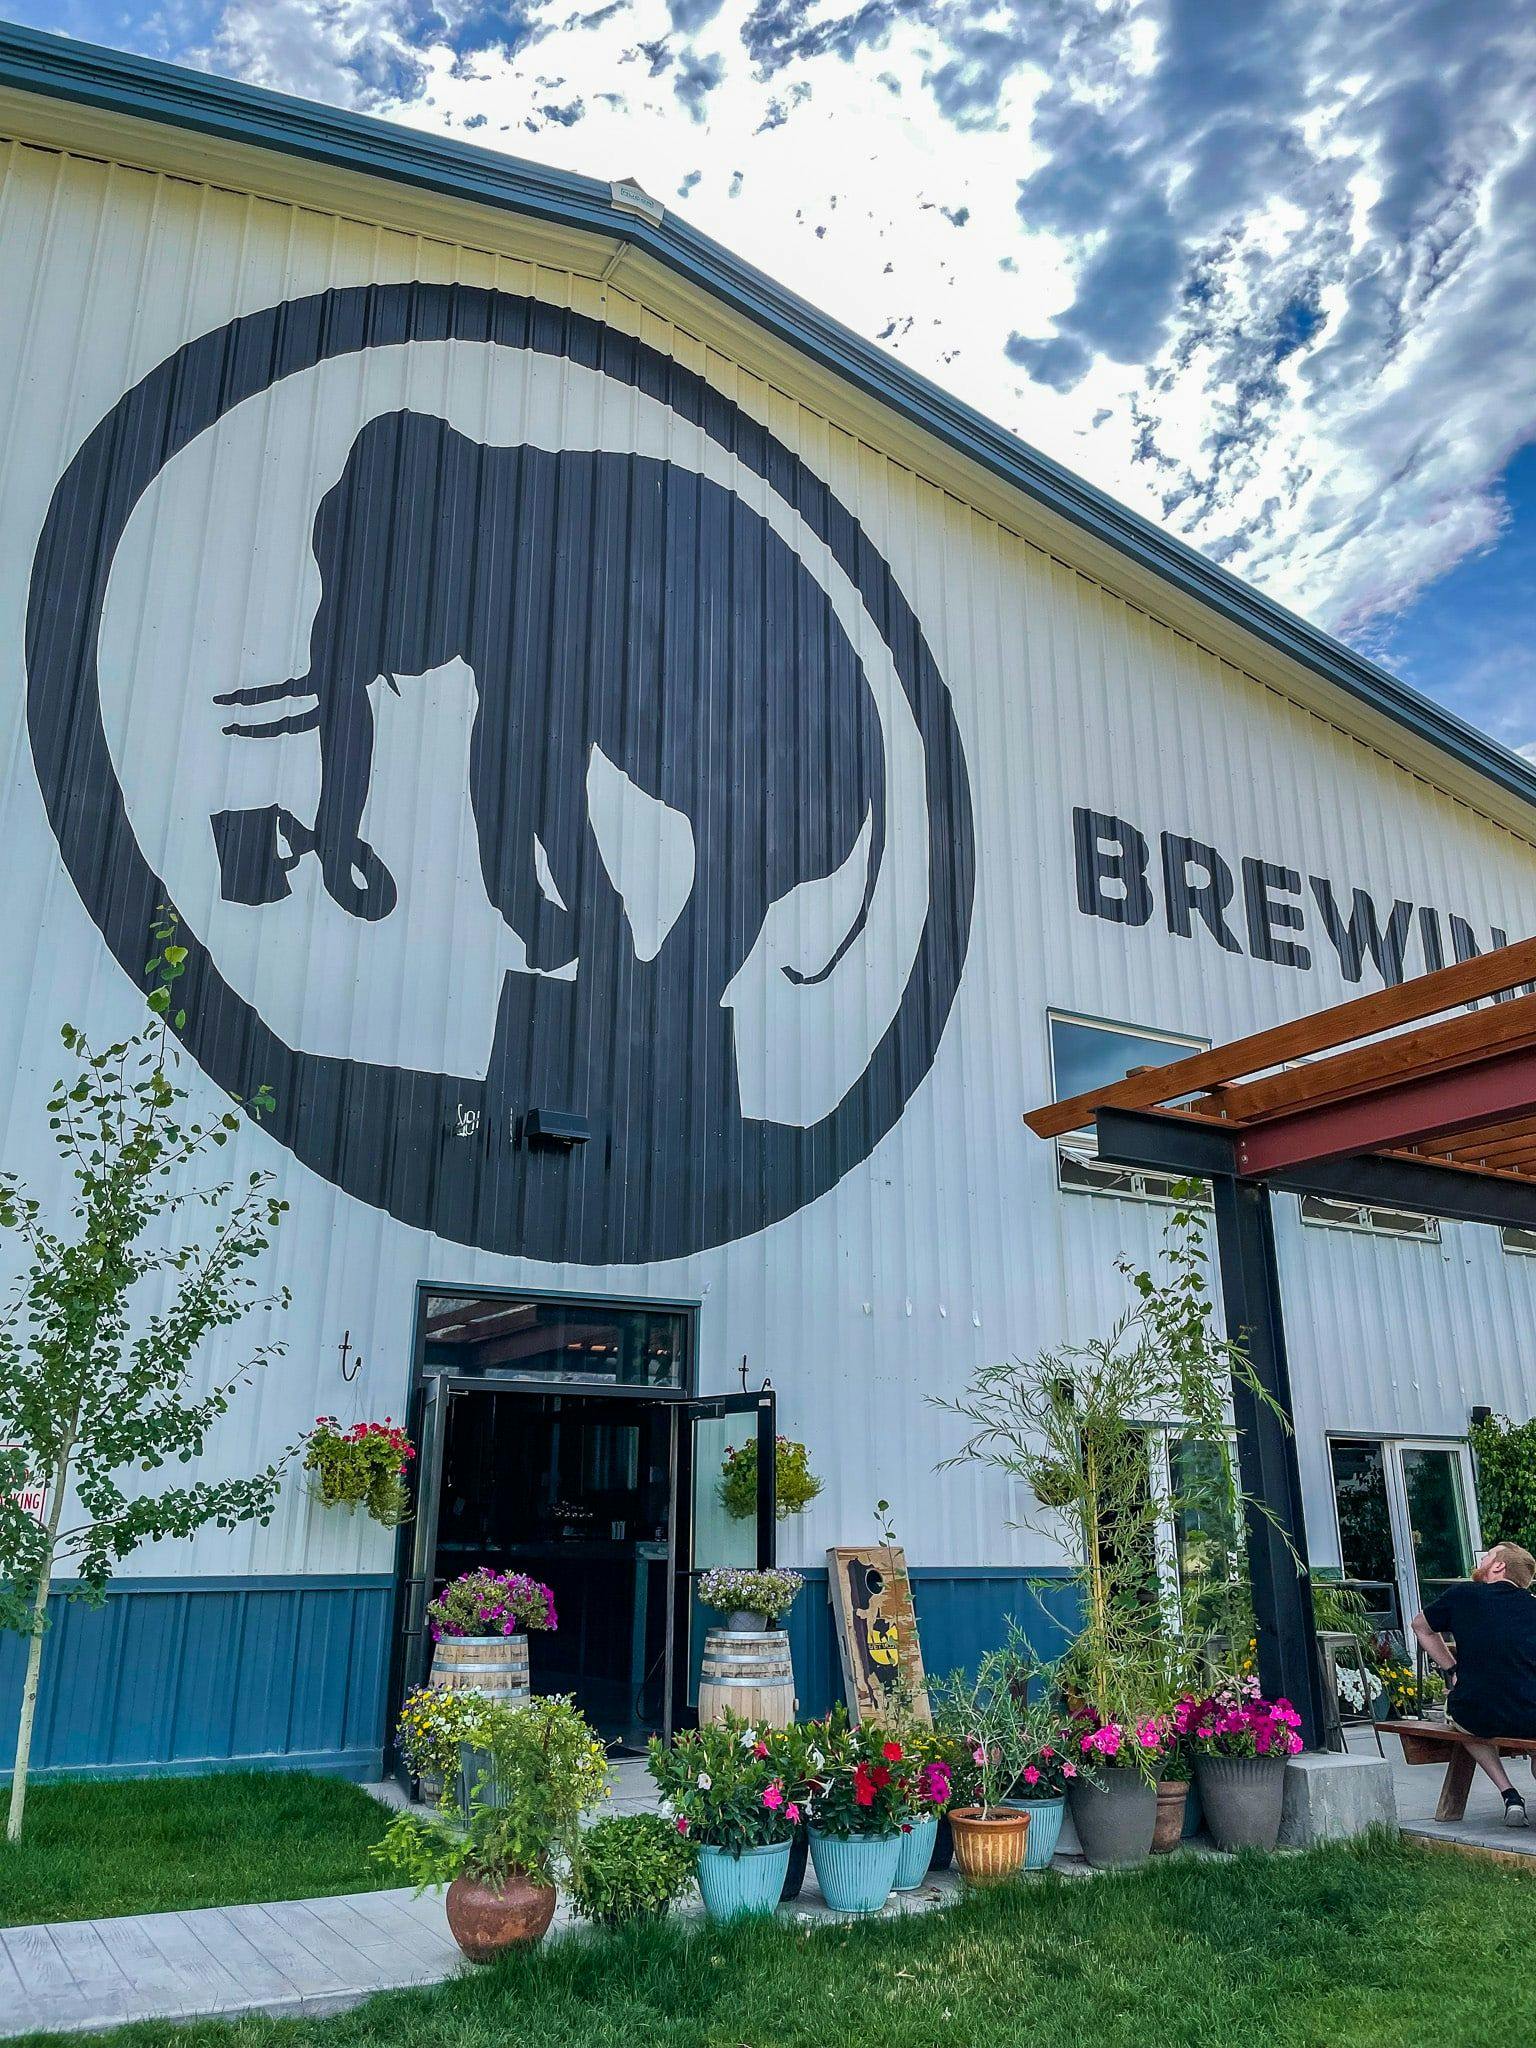 A brewery with a elephant as the logo.